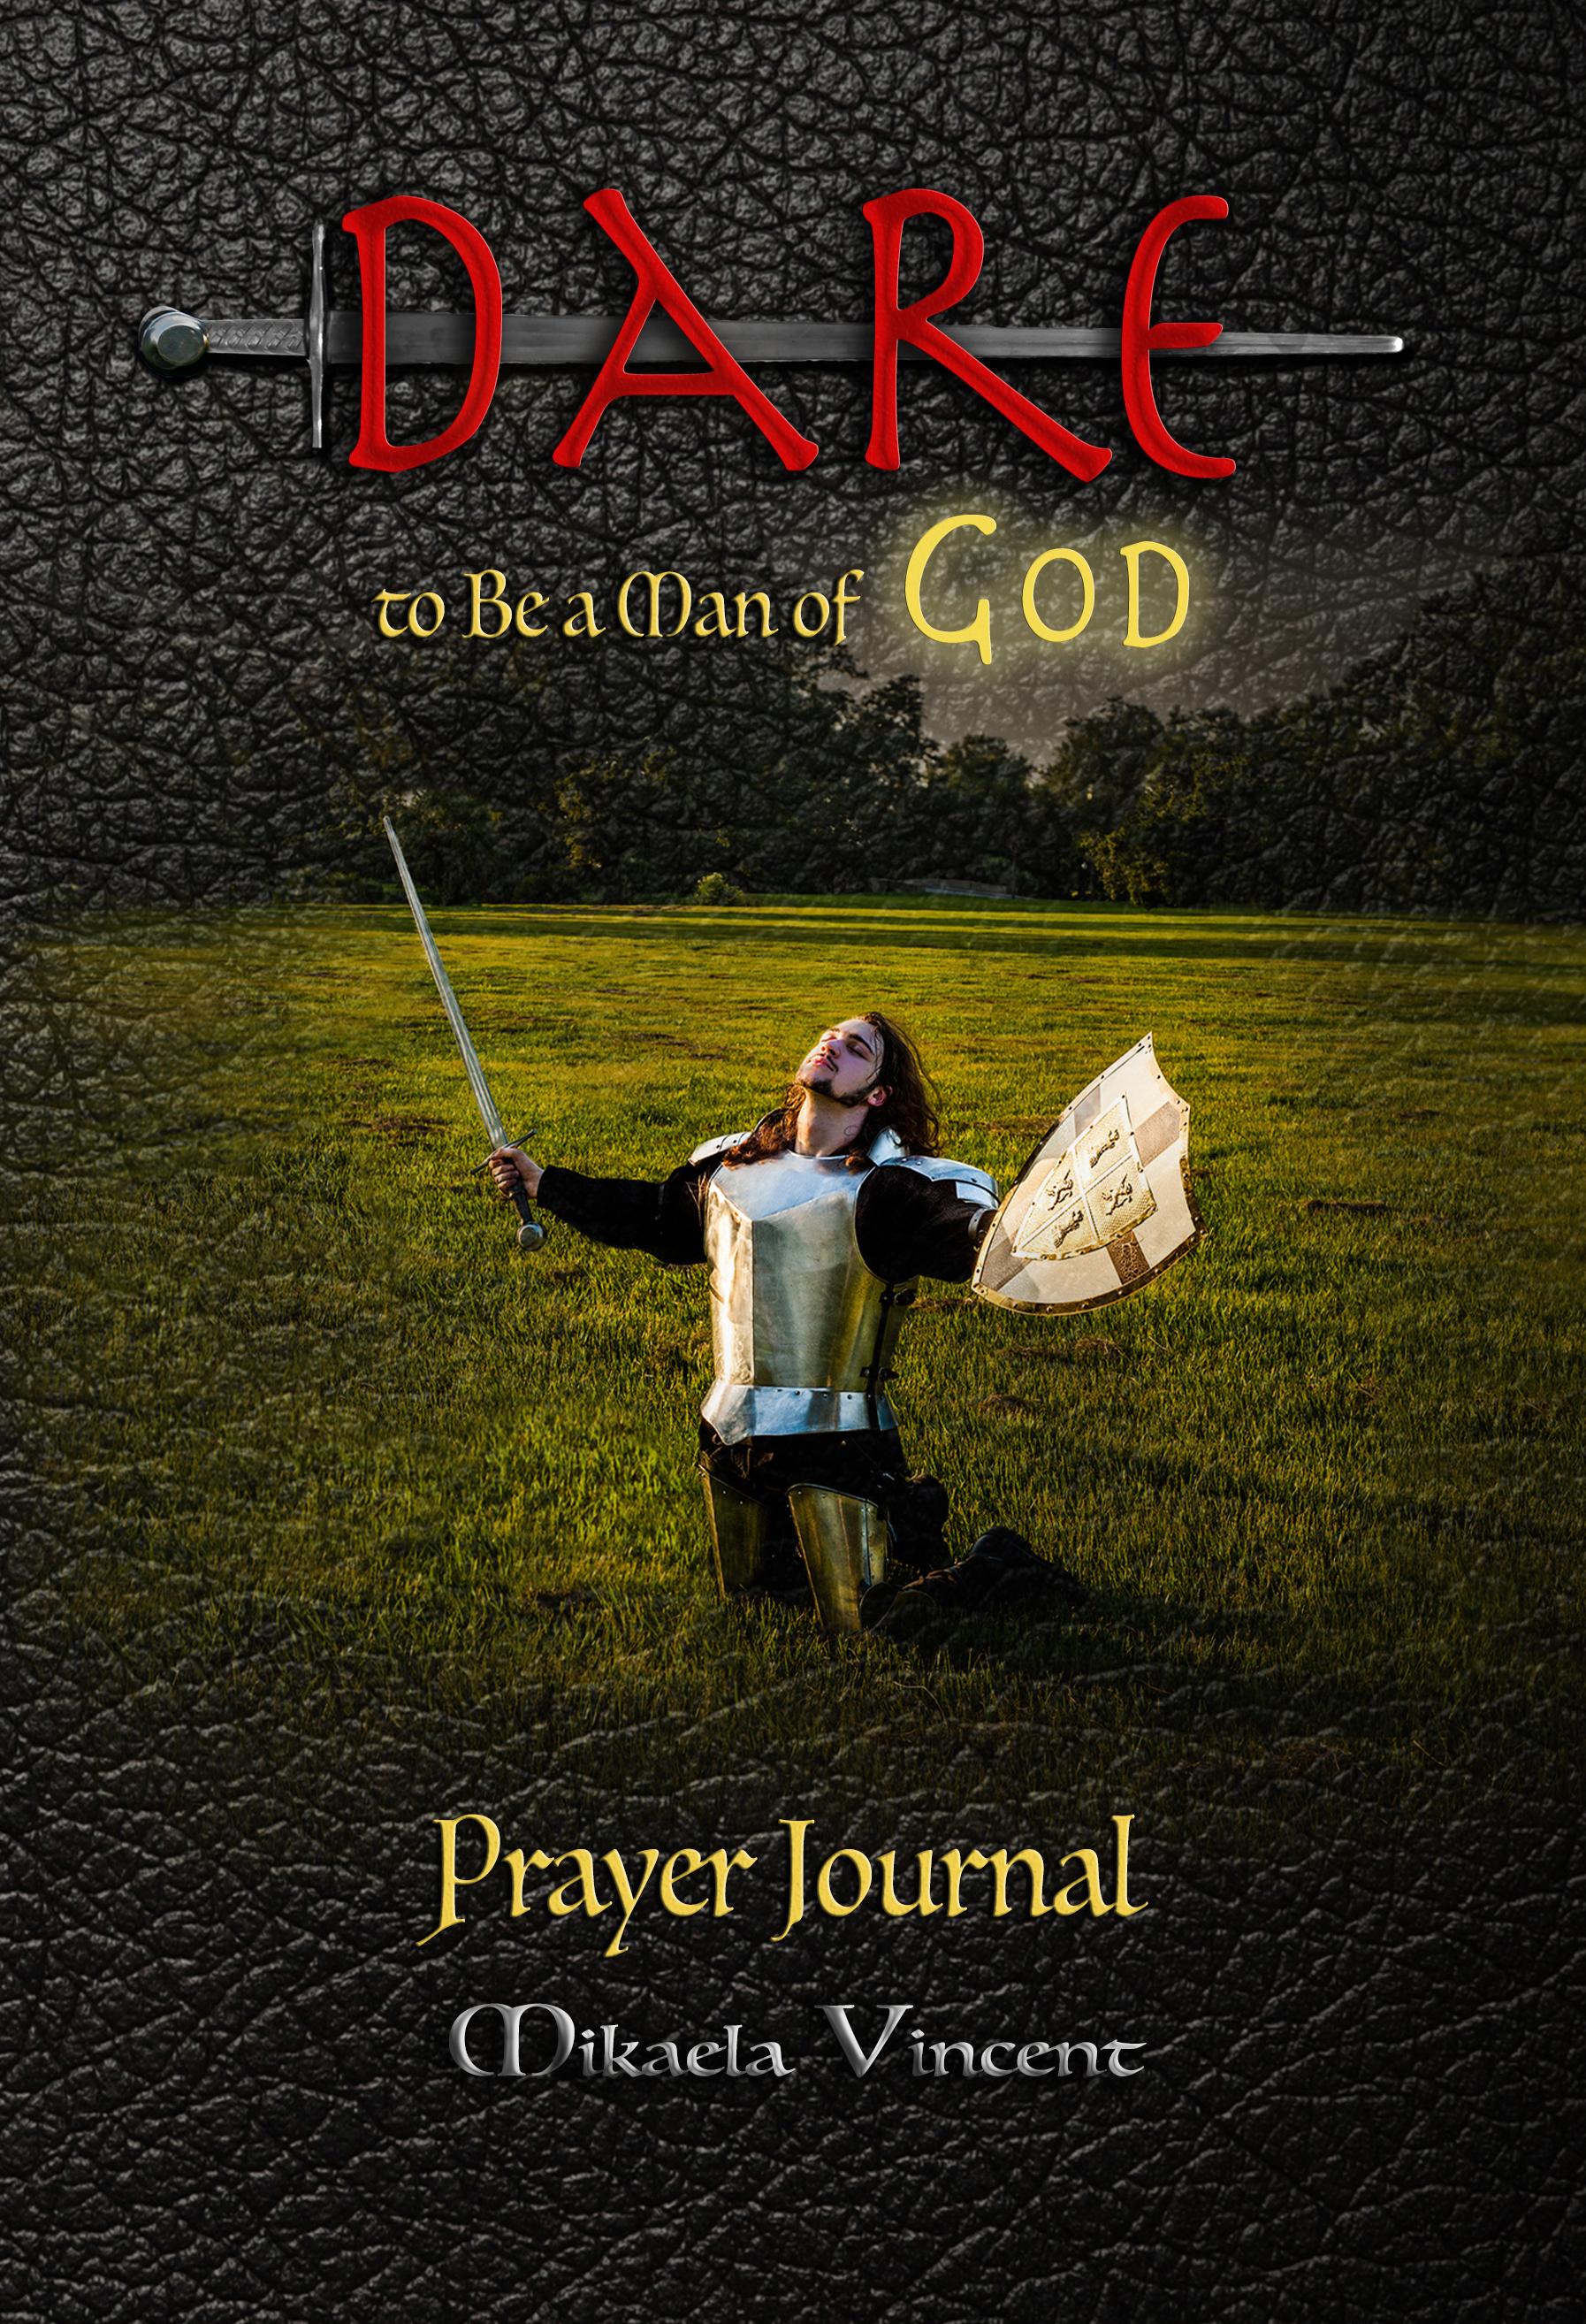 Dare to Be a Man of God Prayer Journal (no lines) (Quiet time devotion book to write in, war room tools for hearing God, walking in the Spirit, knowing God’s will, forgiveness, freedom from strongholds, spiritual warfare, finding true happiness, love): (Devotional notebook for men/teenagers to draw near to God, walk with God, know God’s voice, peace, be filled with the Spirit, follow Jesus calling, make wise decisions, walk in power, conquer sin, transform thoughts, overcome trials, stress, conflict)